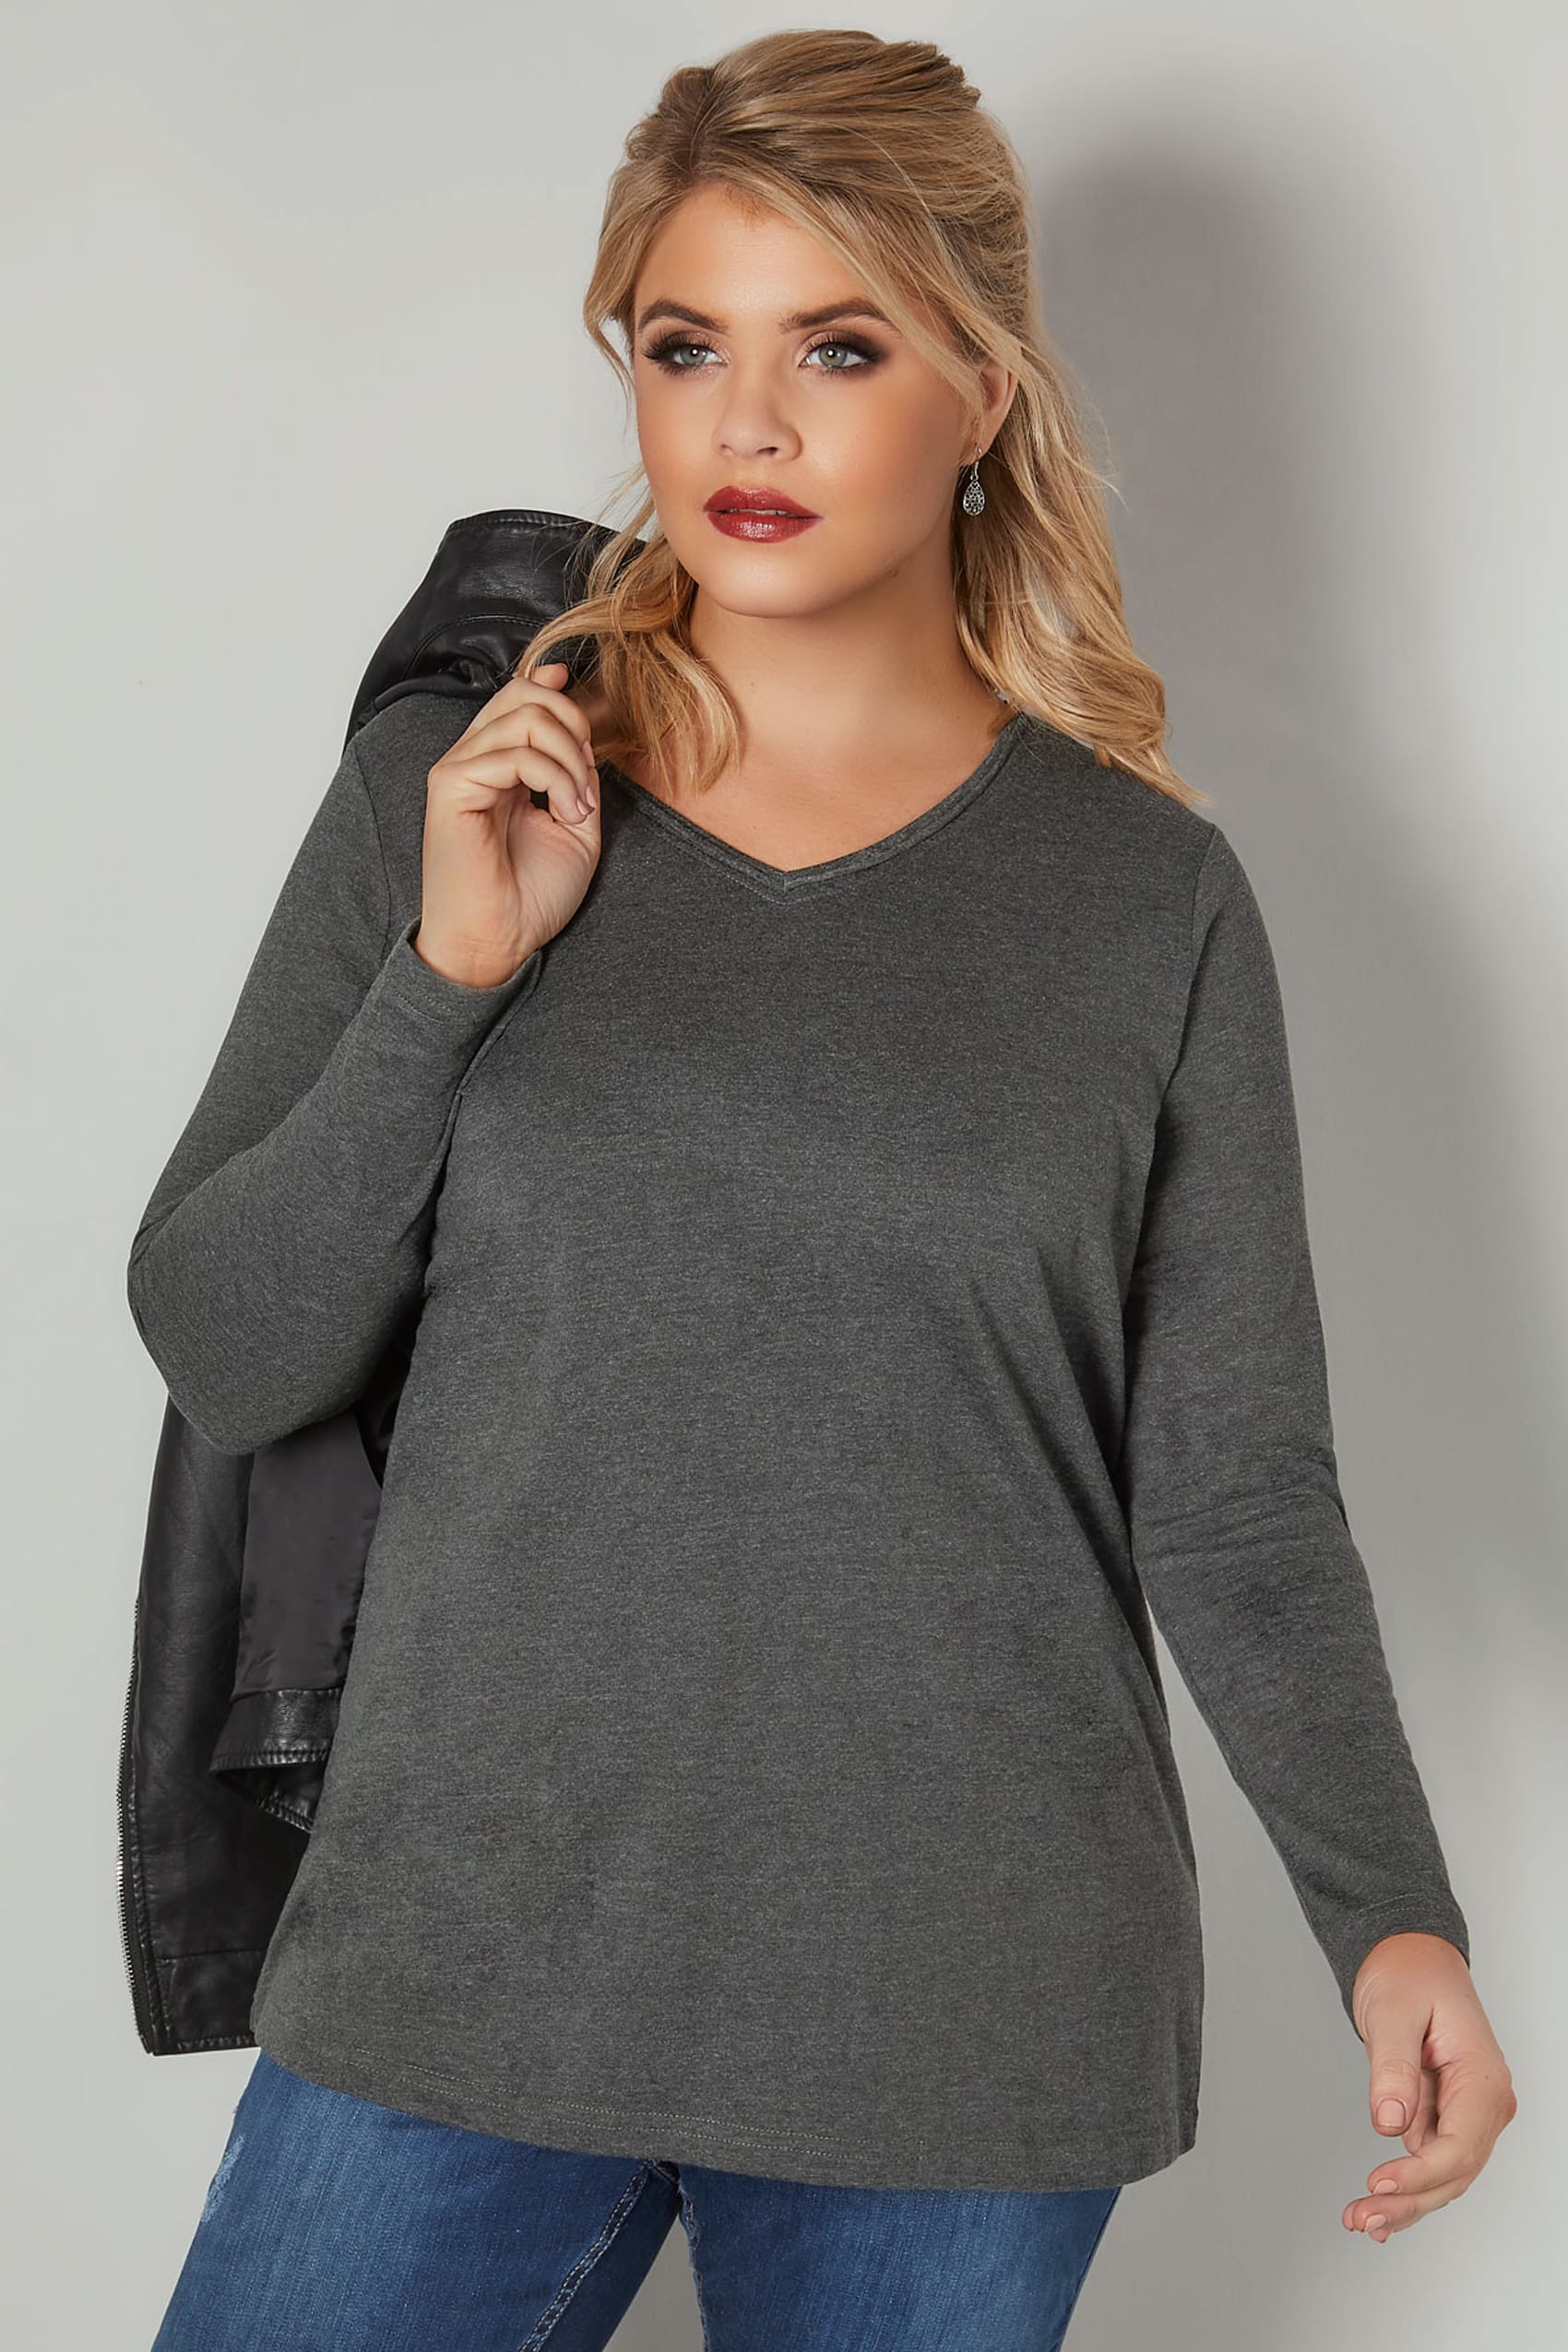 Charcoal Grey Long Sleeved V-Neck Jersey Top, Plus size 16 